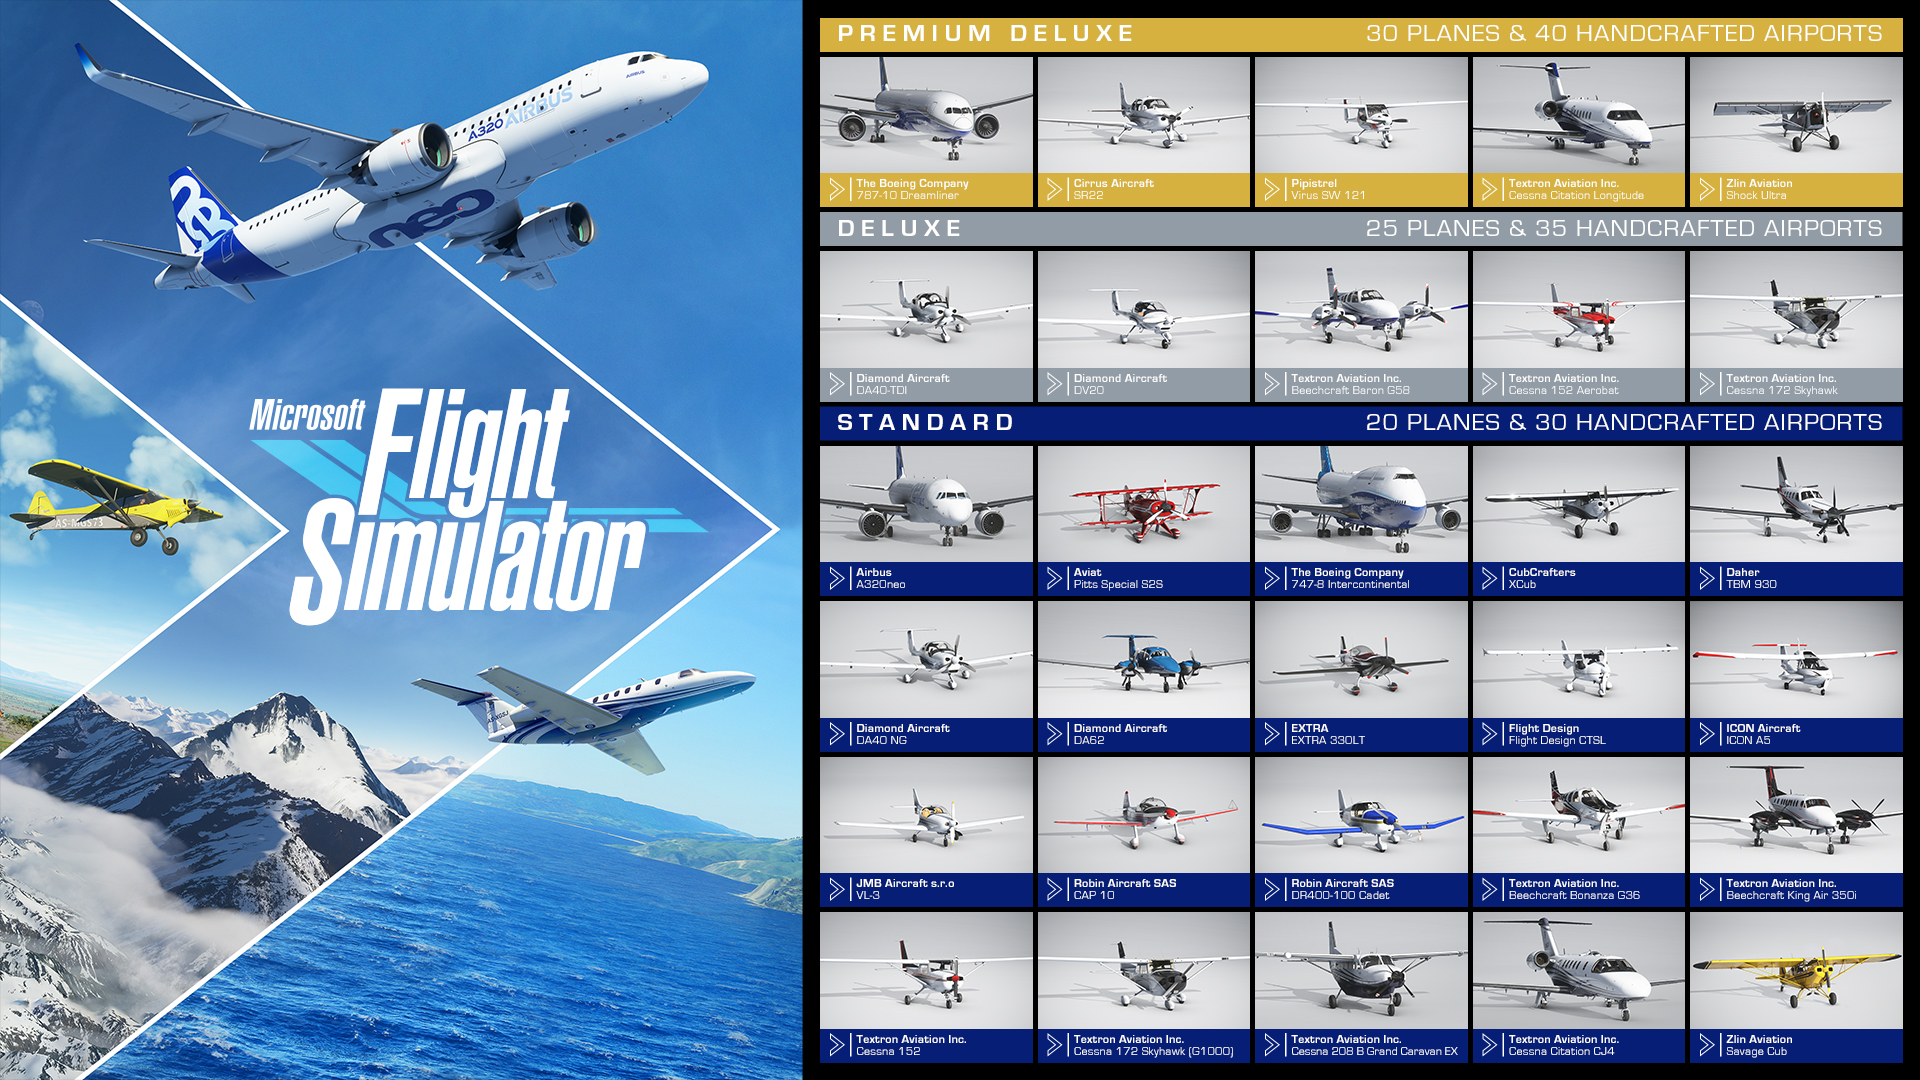 Microsoft Flight Simulator 2020 Available Today On Windows 10 And Xbox Game  Pass For PC | XBOXONE-HQ.COM